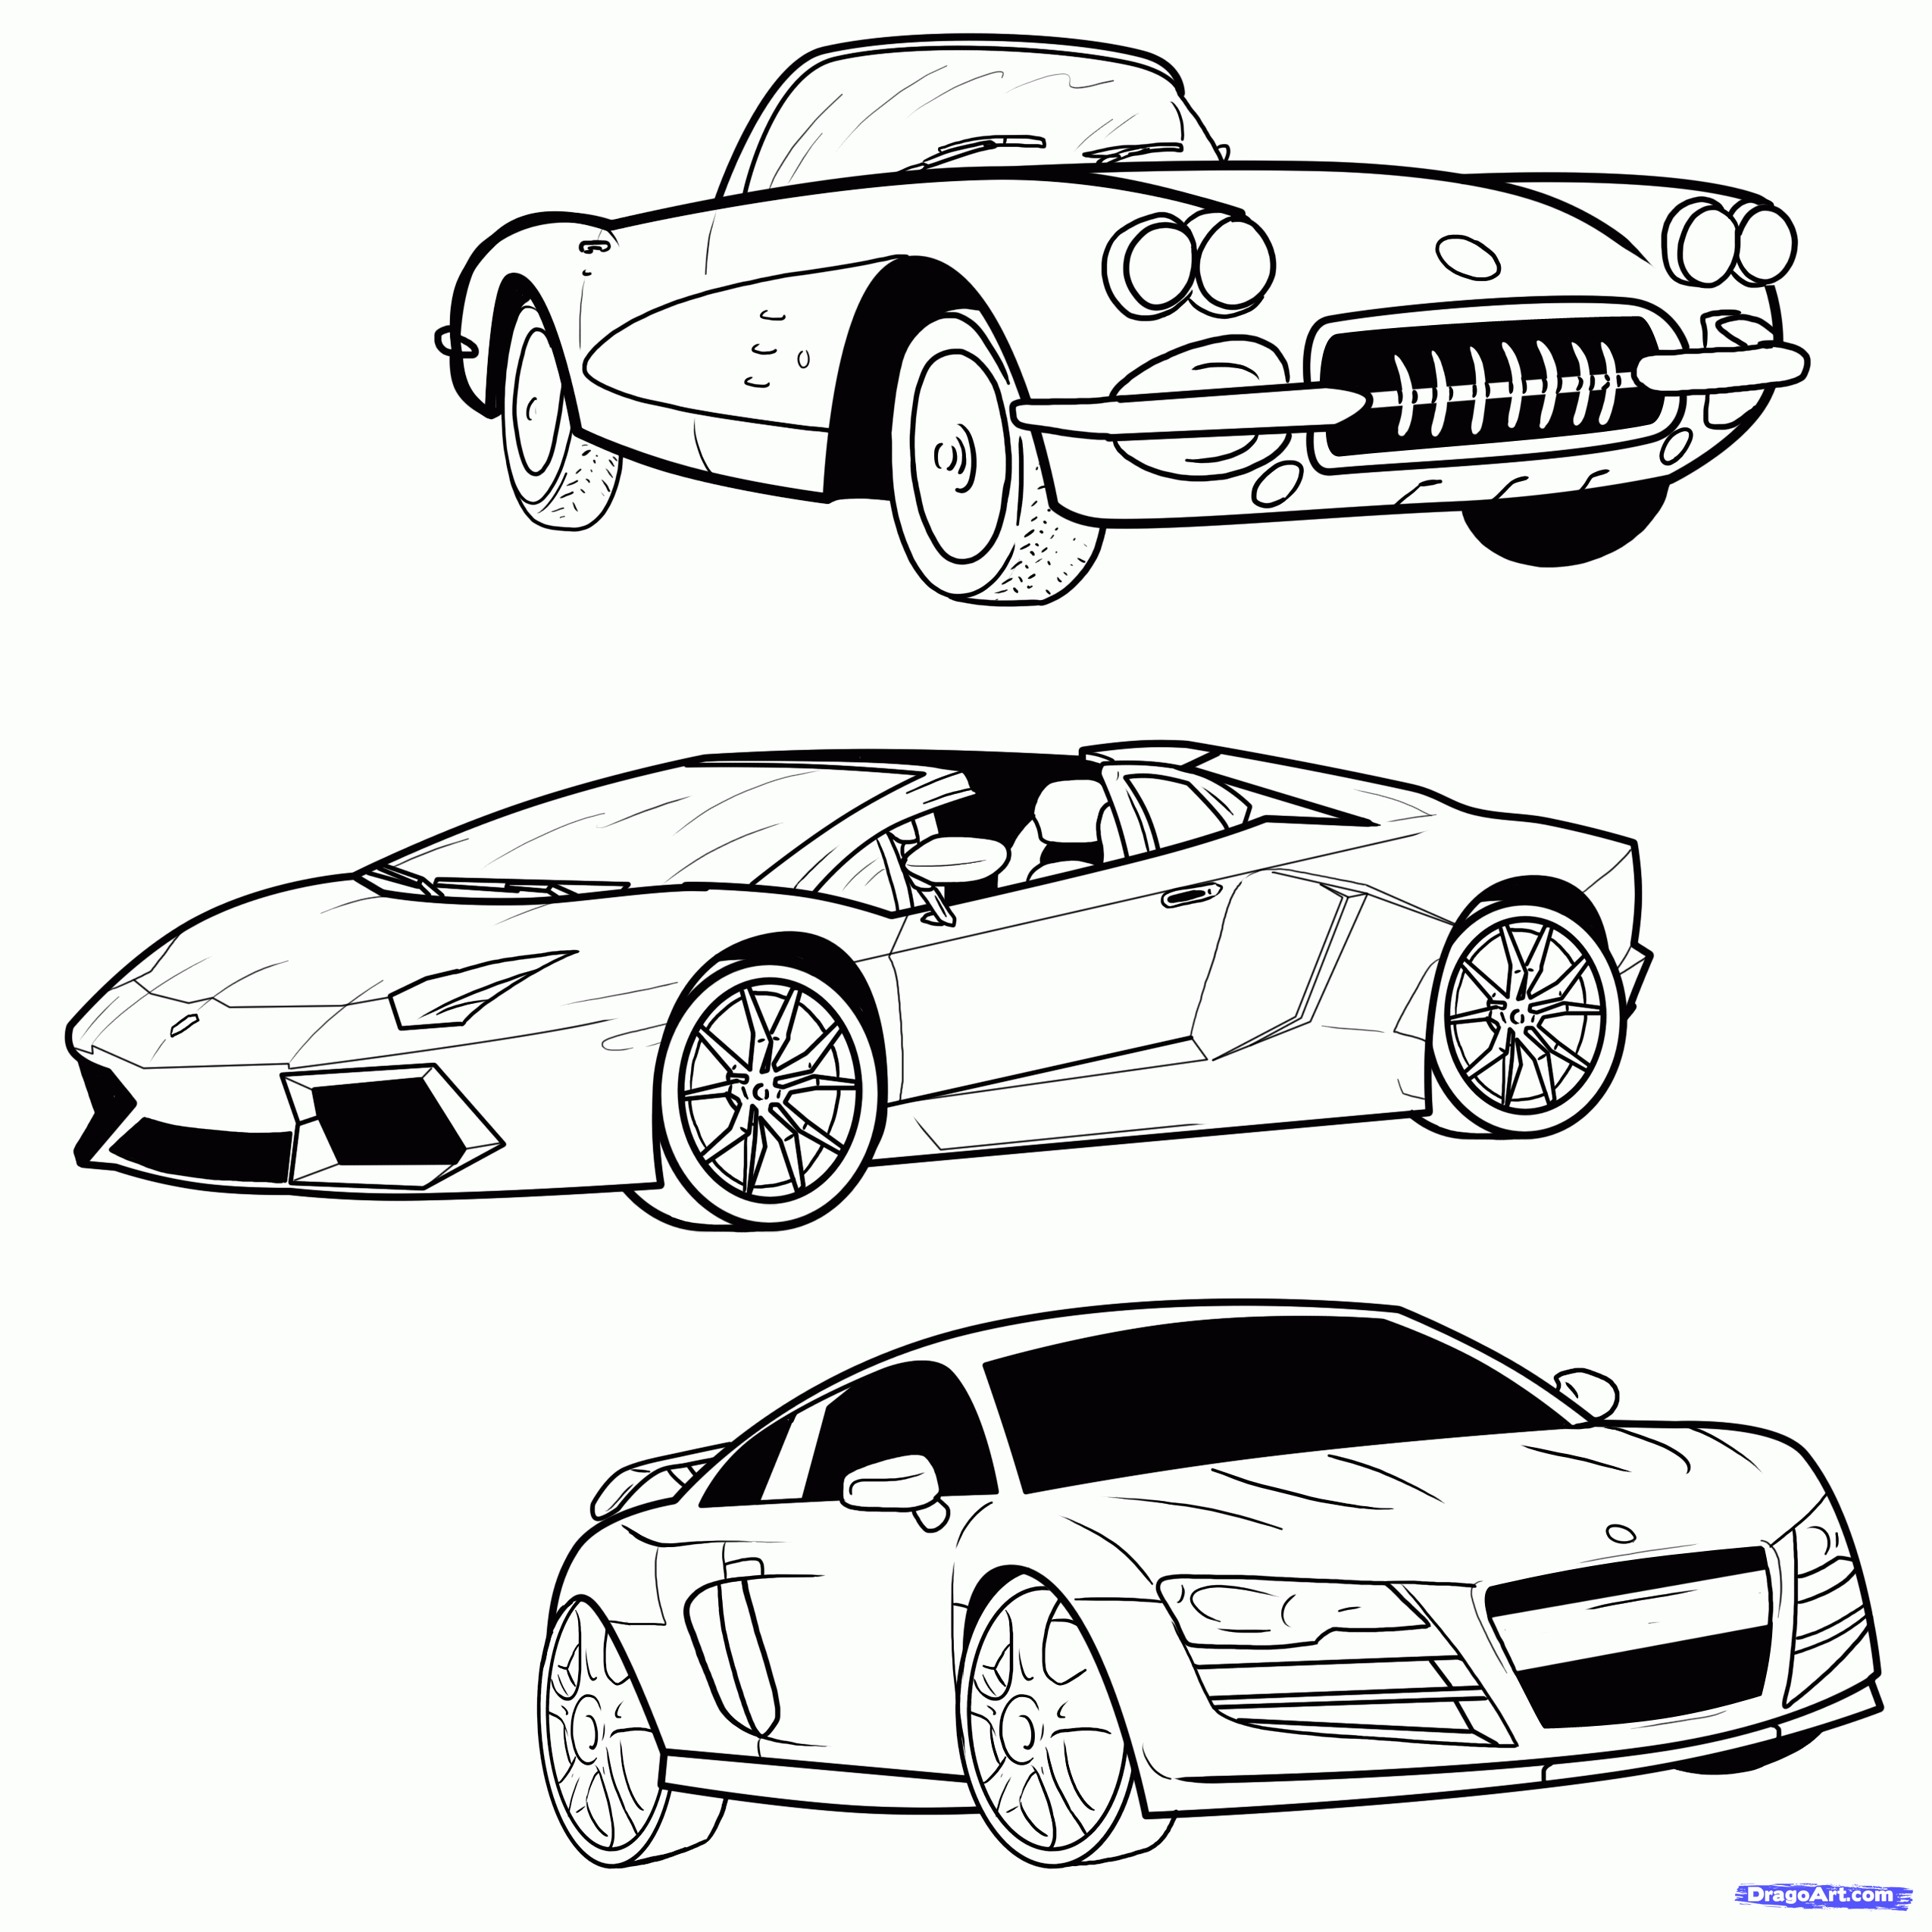 How to Draw a Sports Car, Step by Step, Cars, Draw Cars Online ...